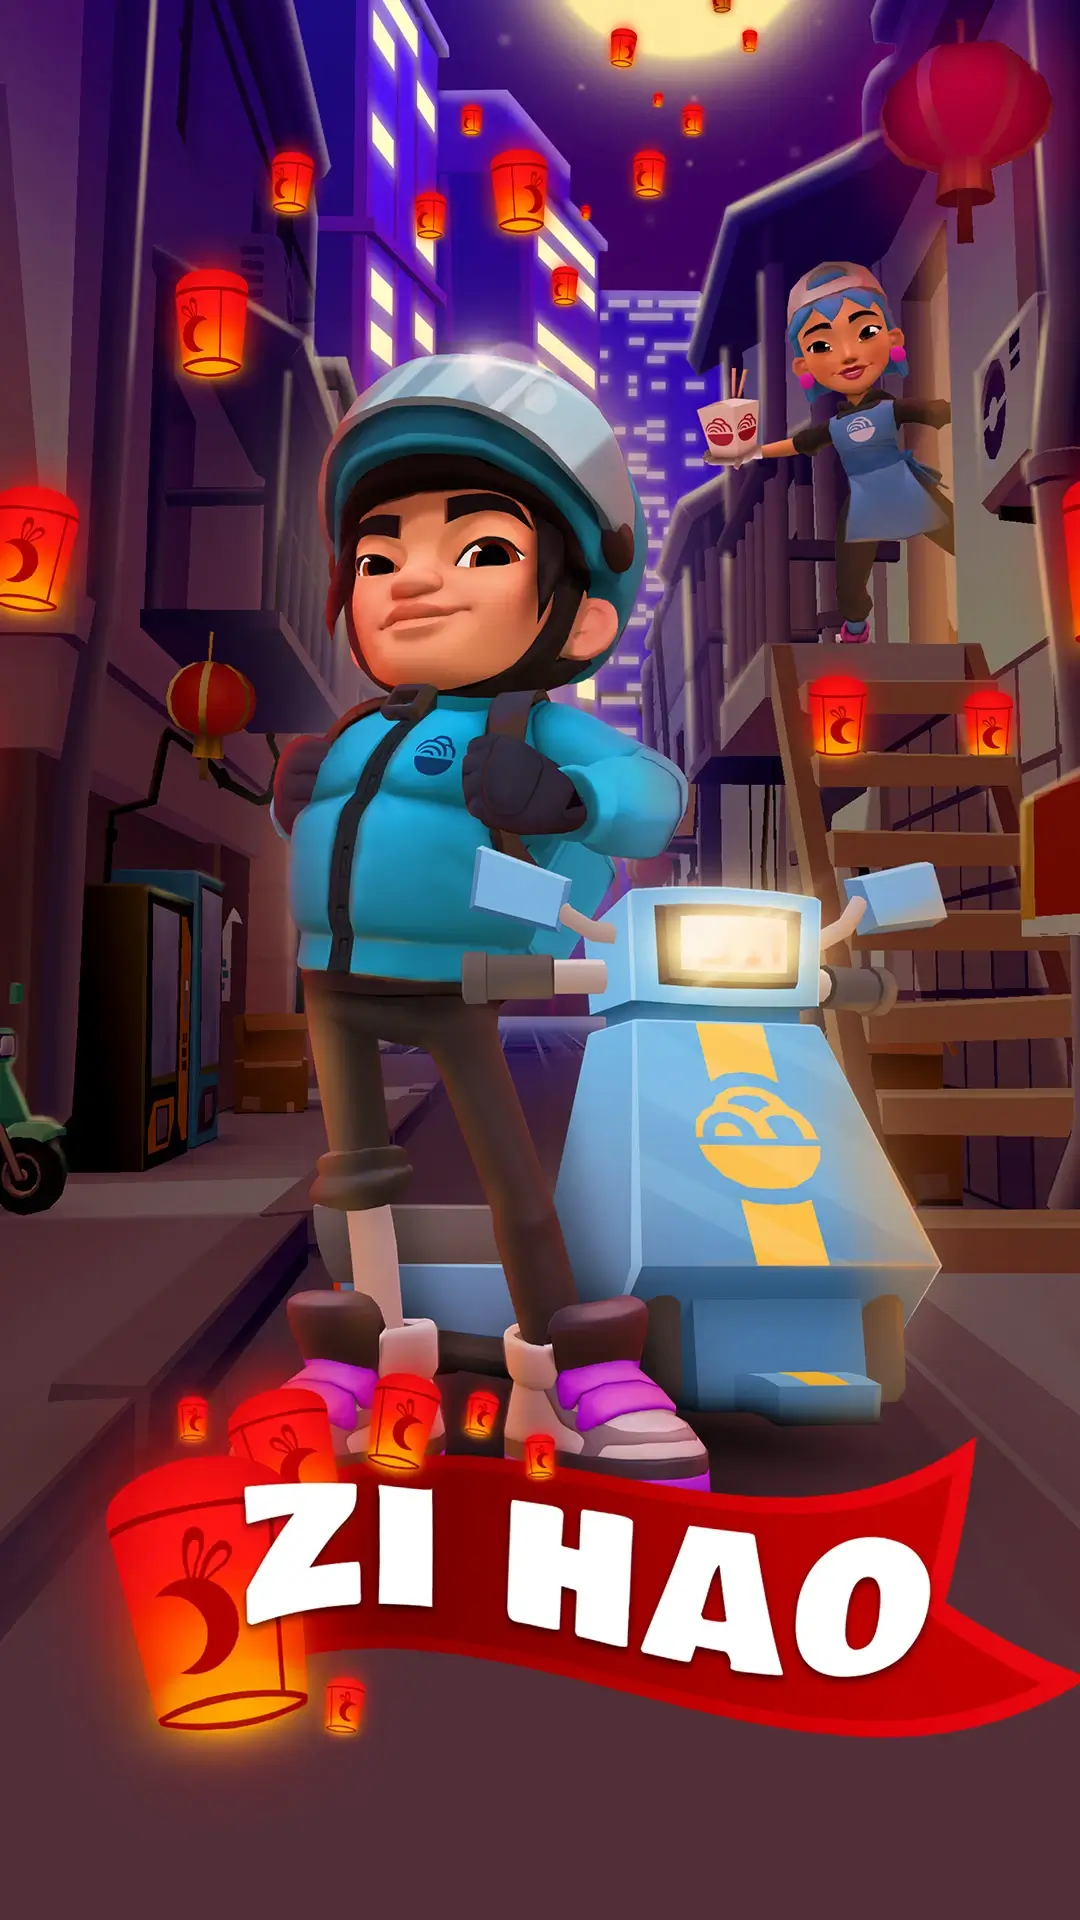 Subway Surfers Zurich 0 Delay APK 2023 latest 2.2.0 for Android